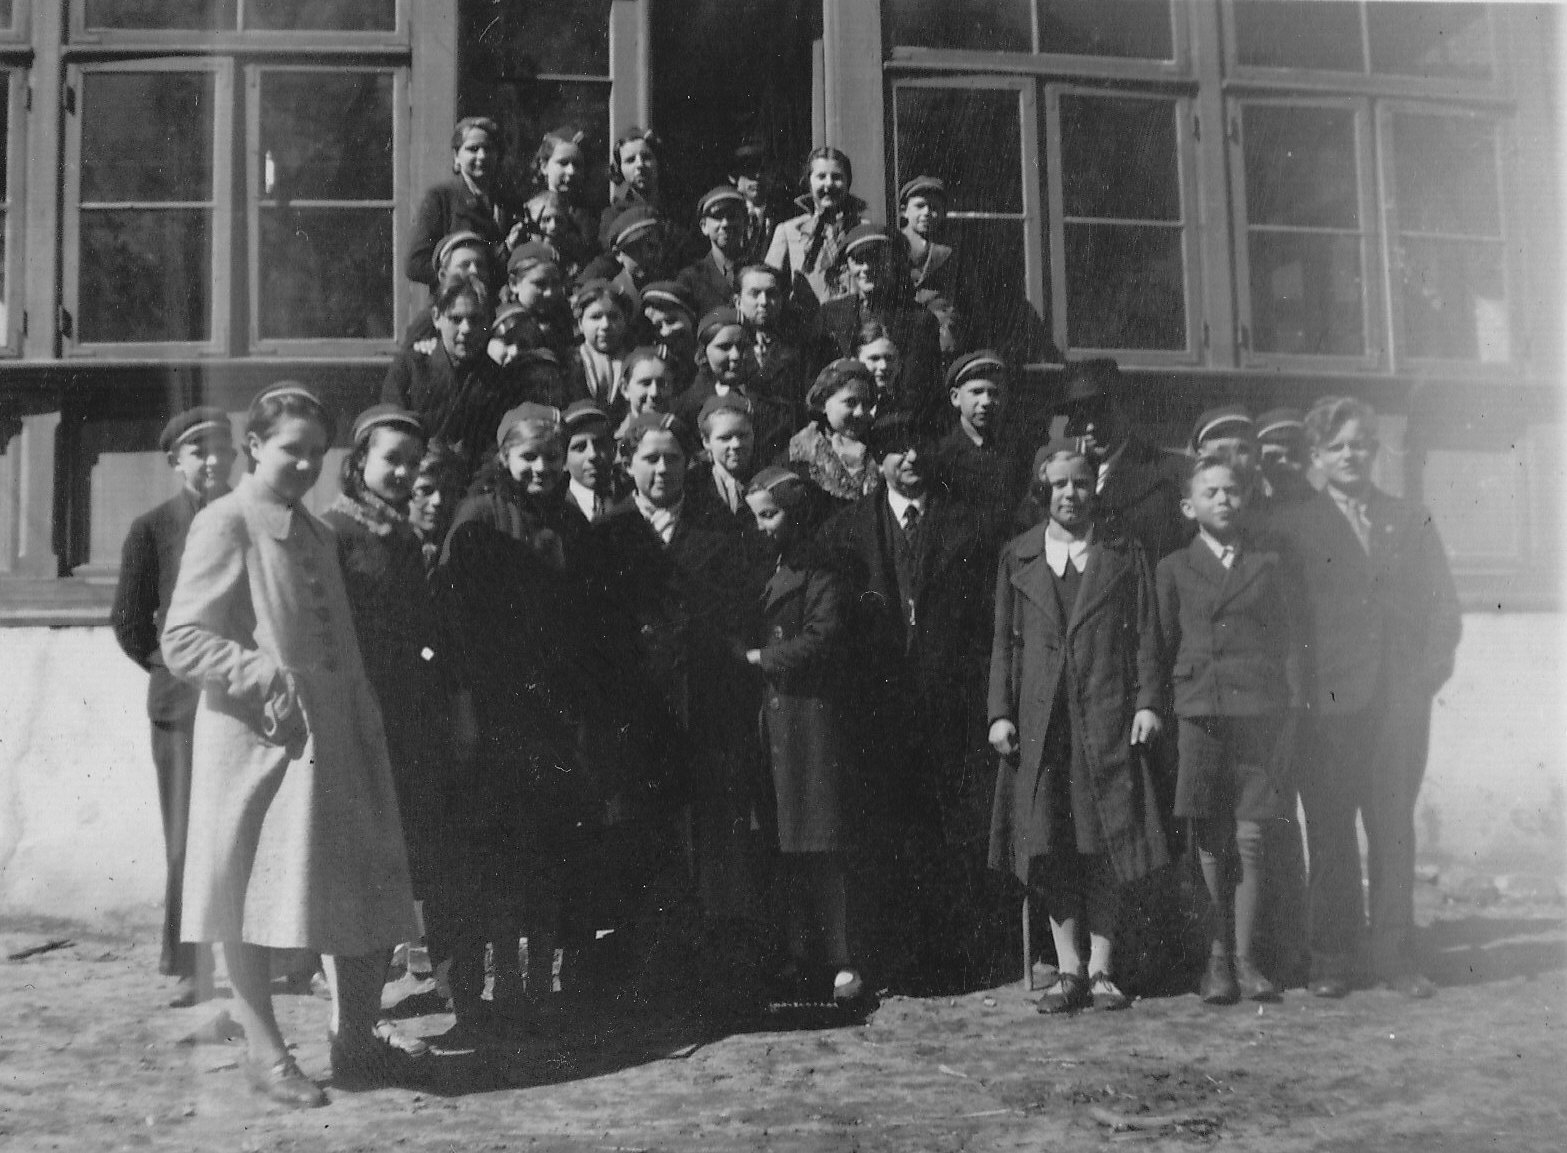 Students of the Horned Gymnasium in front of the Pastorage Building of Helme Church in the late 1930s